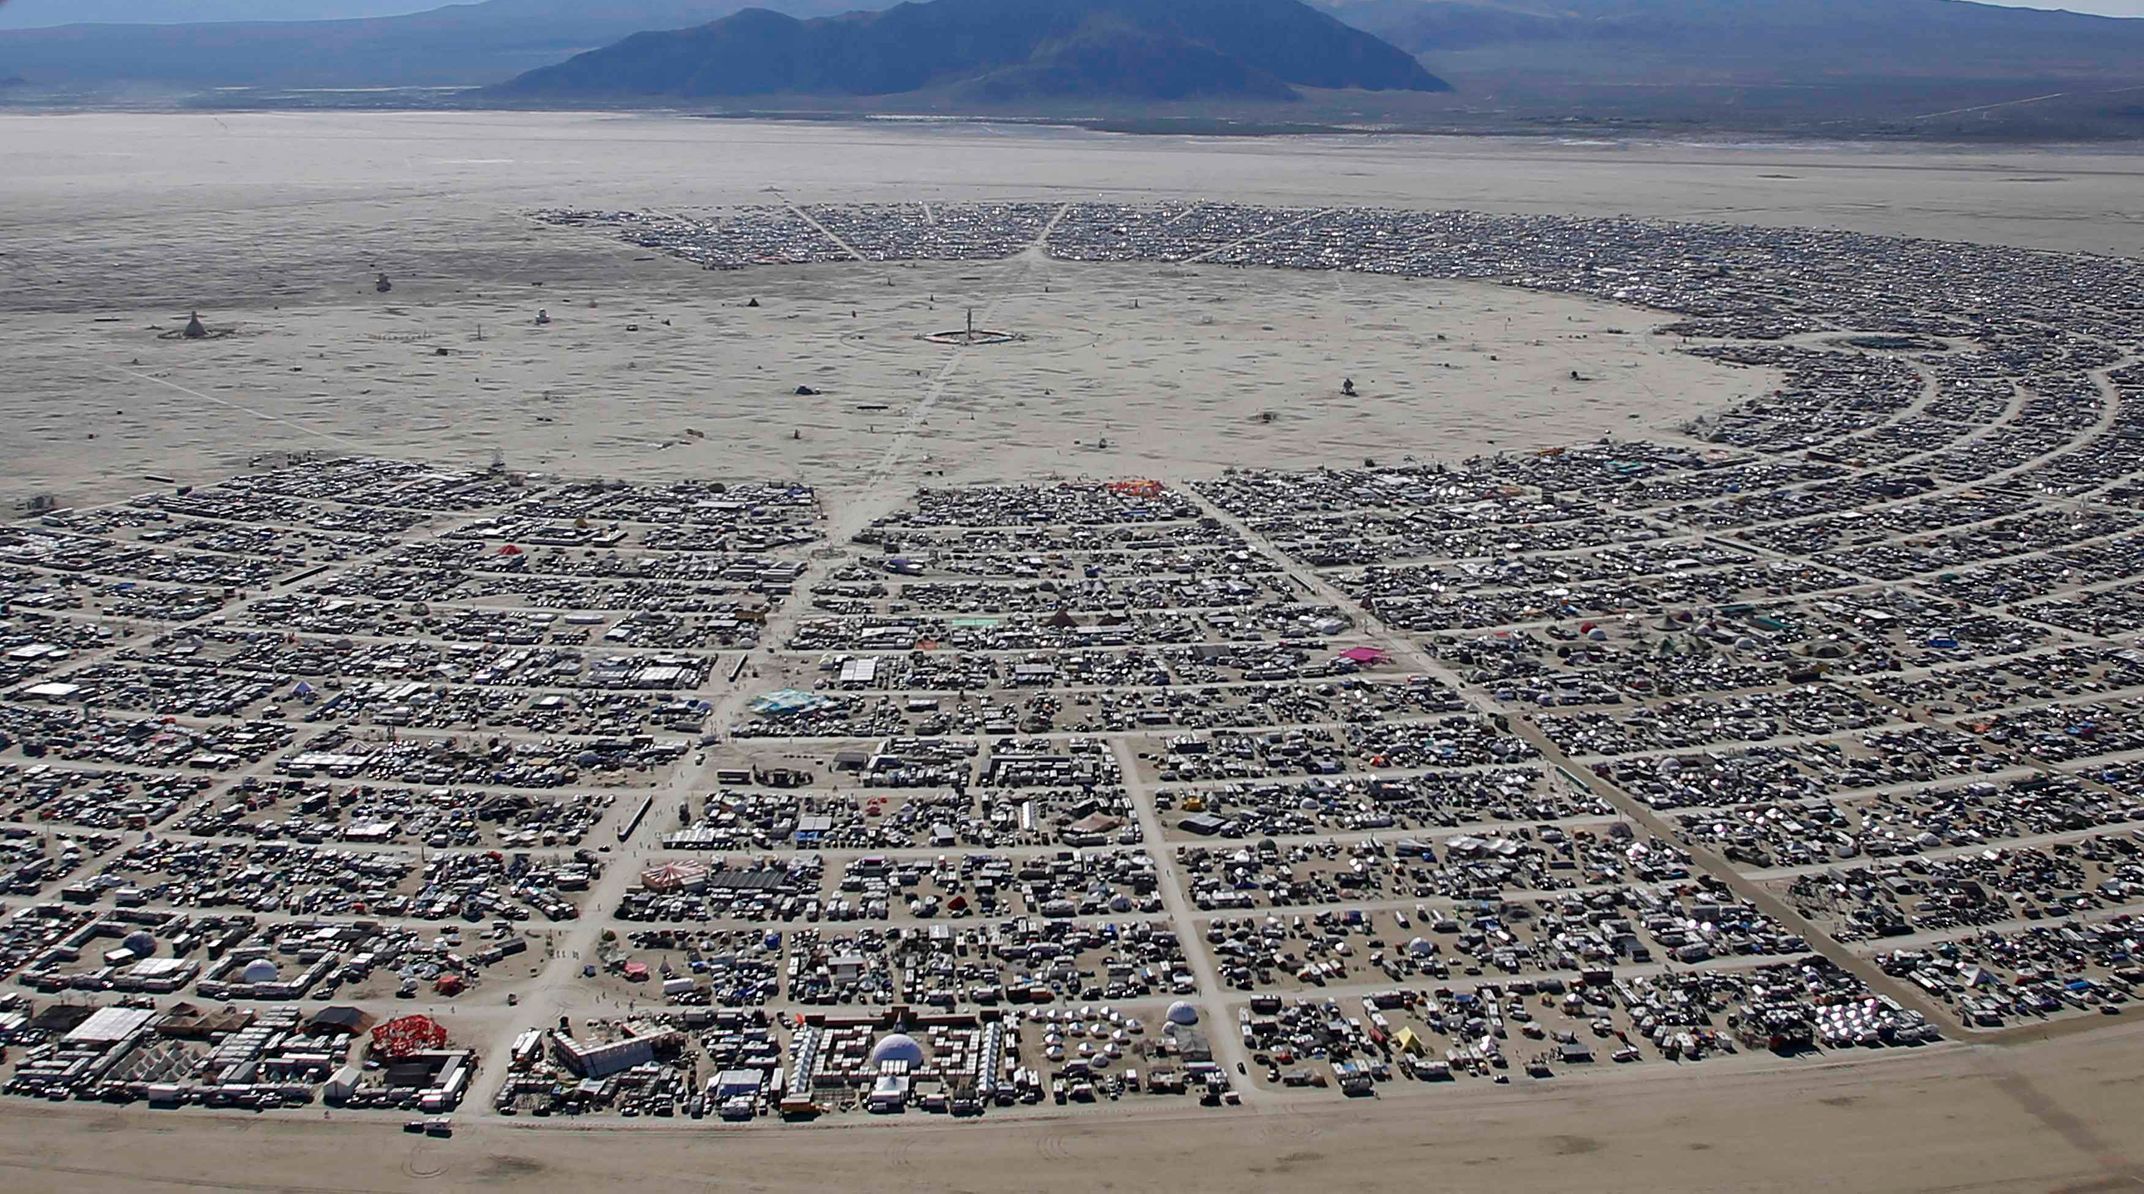 An aerial view during the Burning Man 2014 &quot;Caravansary&quot; arts and music festival in the Black Rock Desert of Nevada